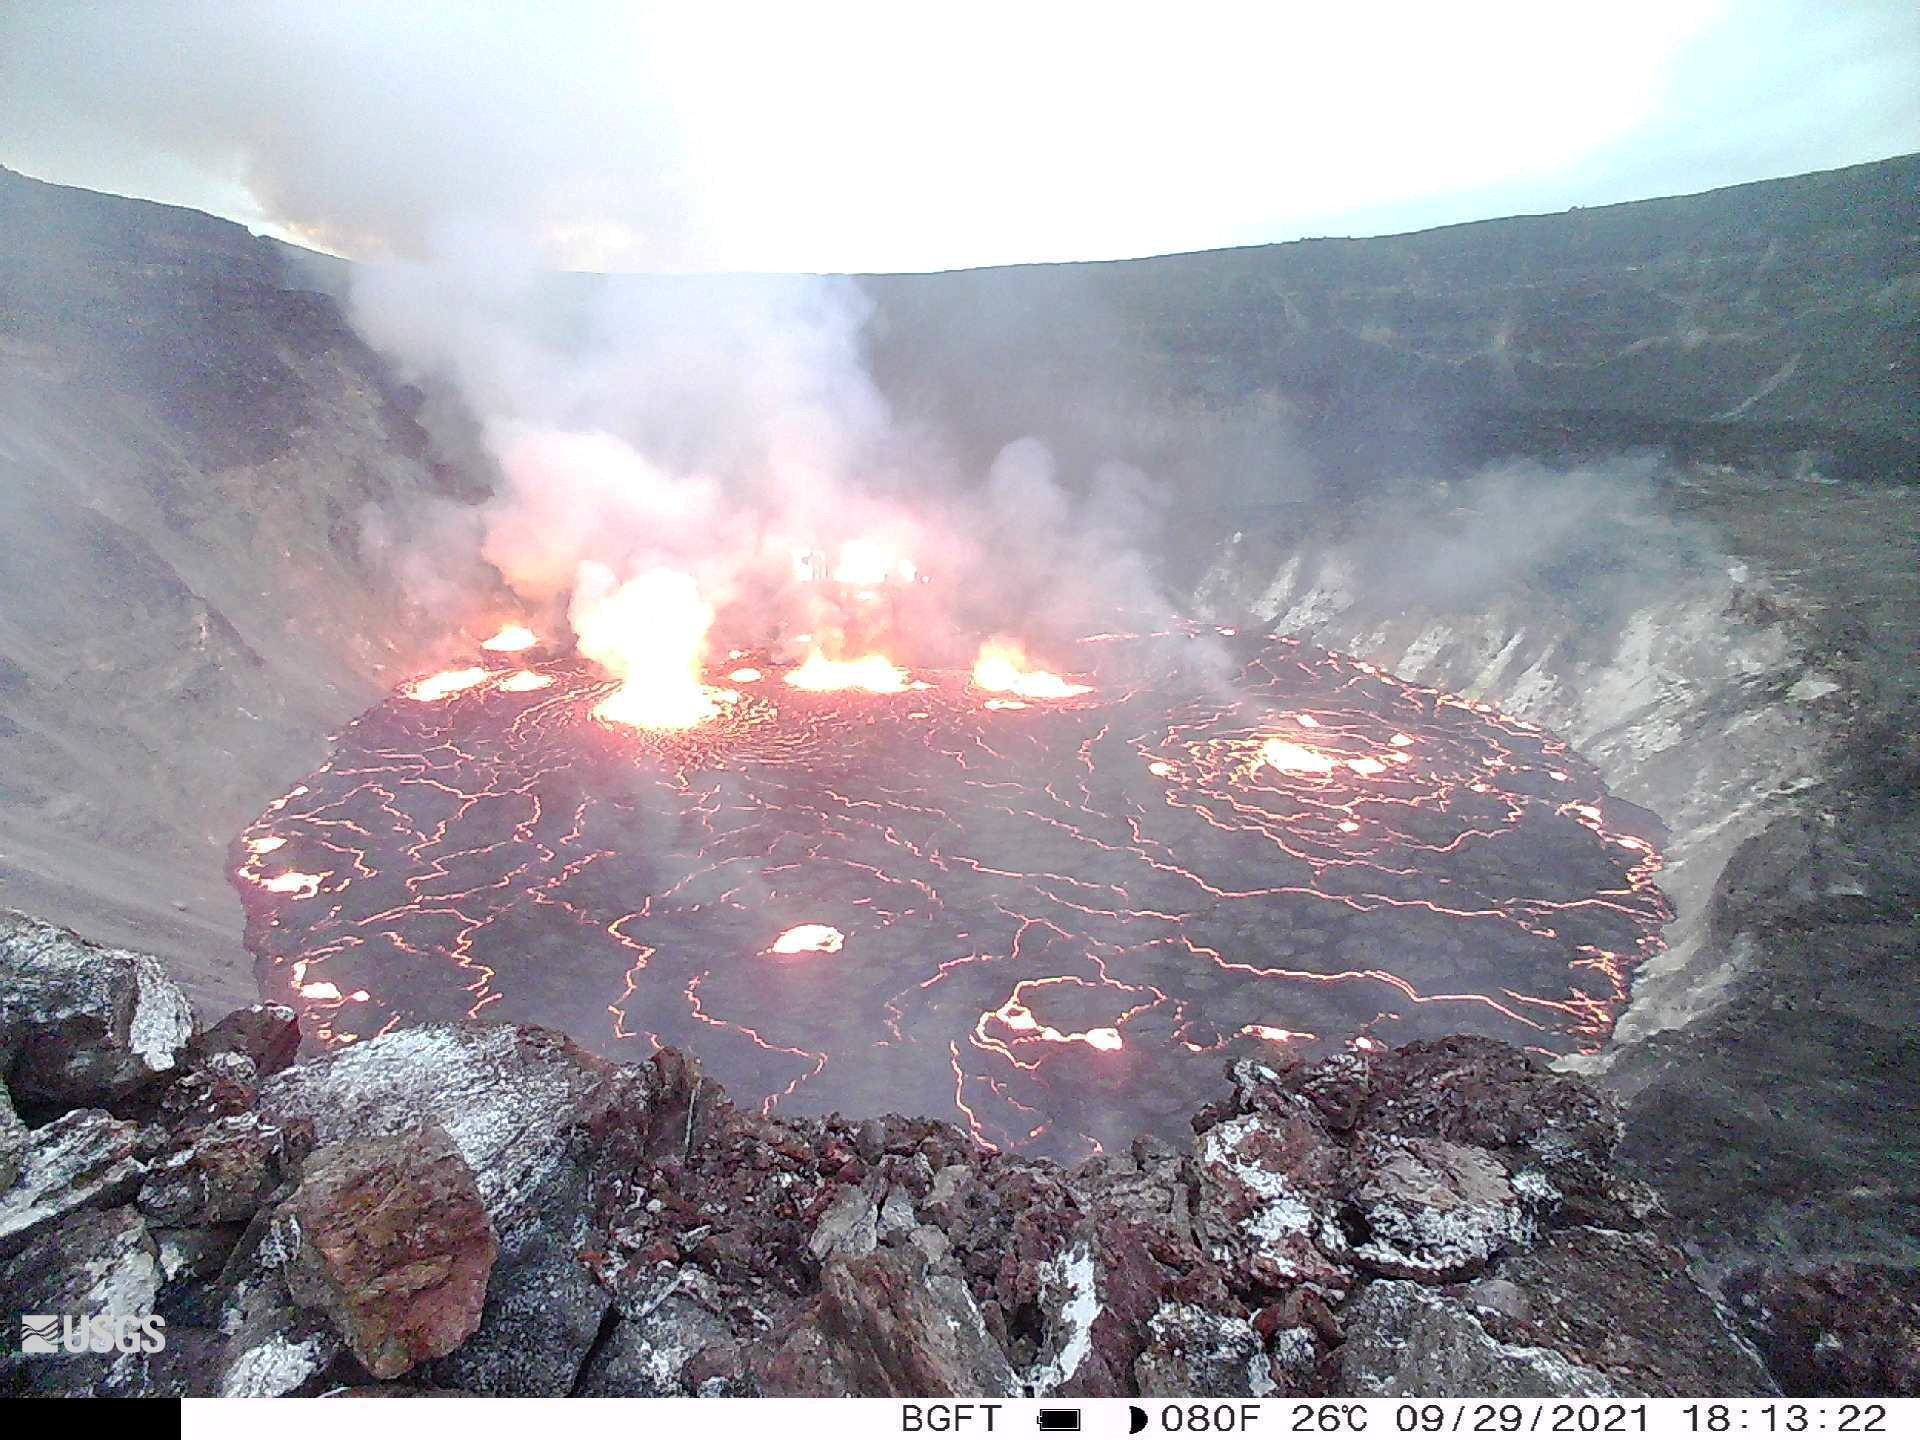 General view of lava surfacing on the Halema'uma'u crater of Kilauea volcano in Kilauea, Hawaii, U.S. September 29, 2021, in this still image provided by the USGS surveillance camera. Mandatory credit USGS/via REUTERS